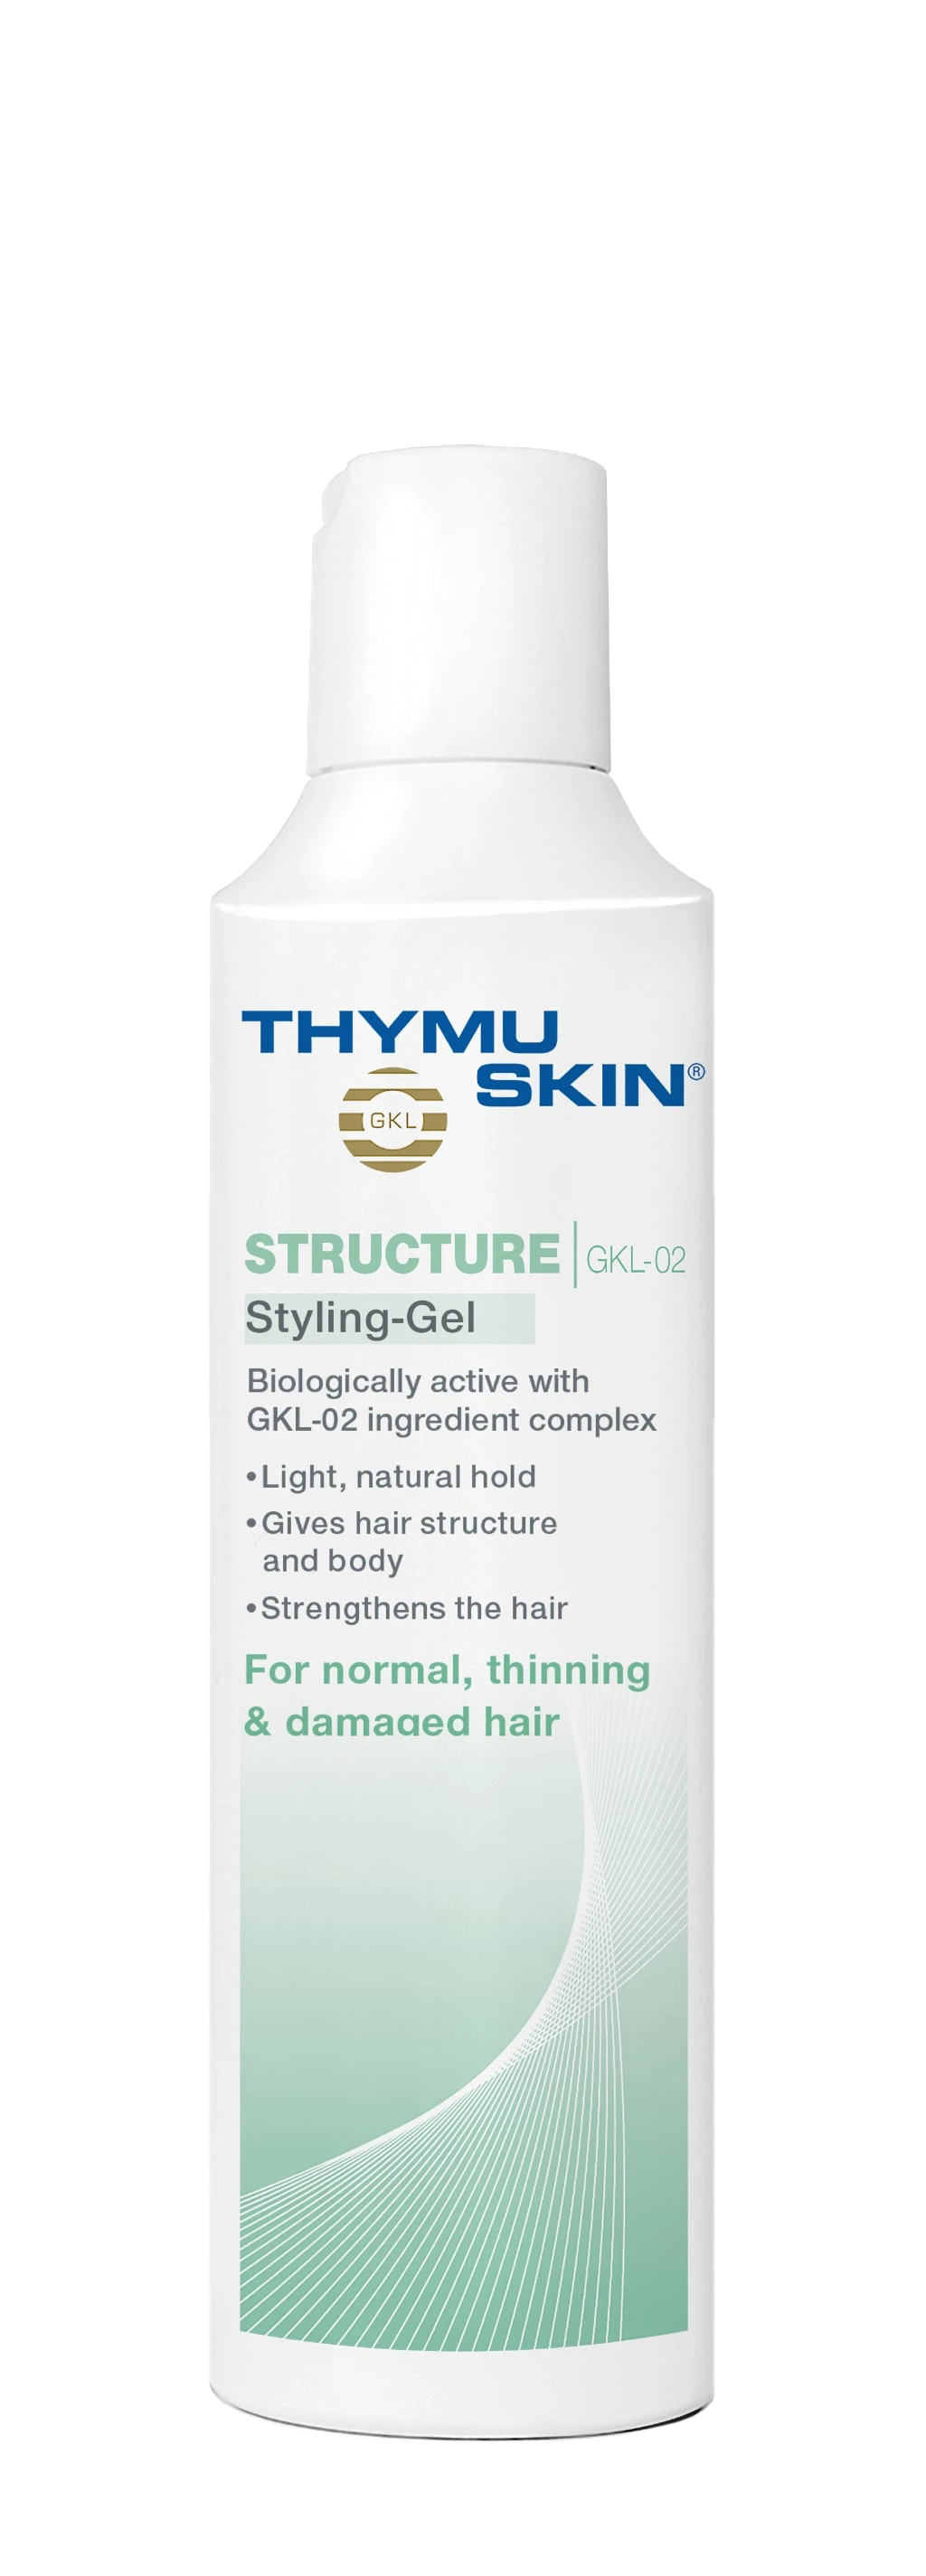 STRUCTURE Styling-Gel